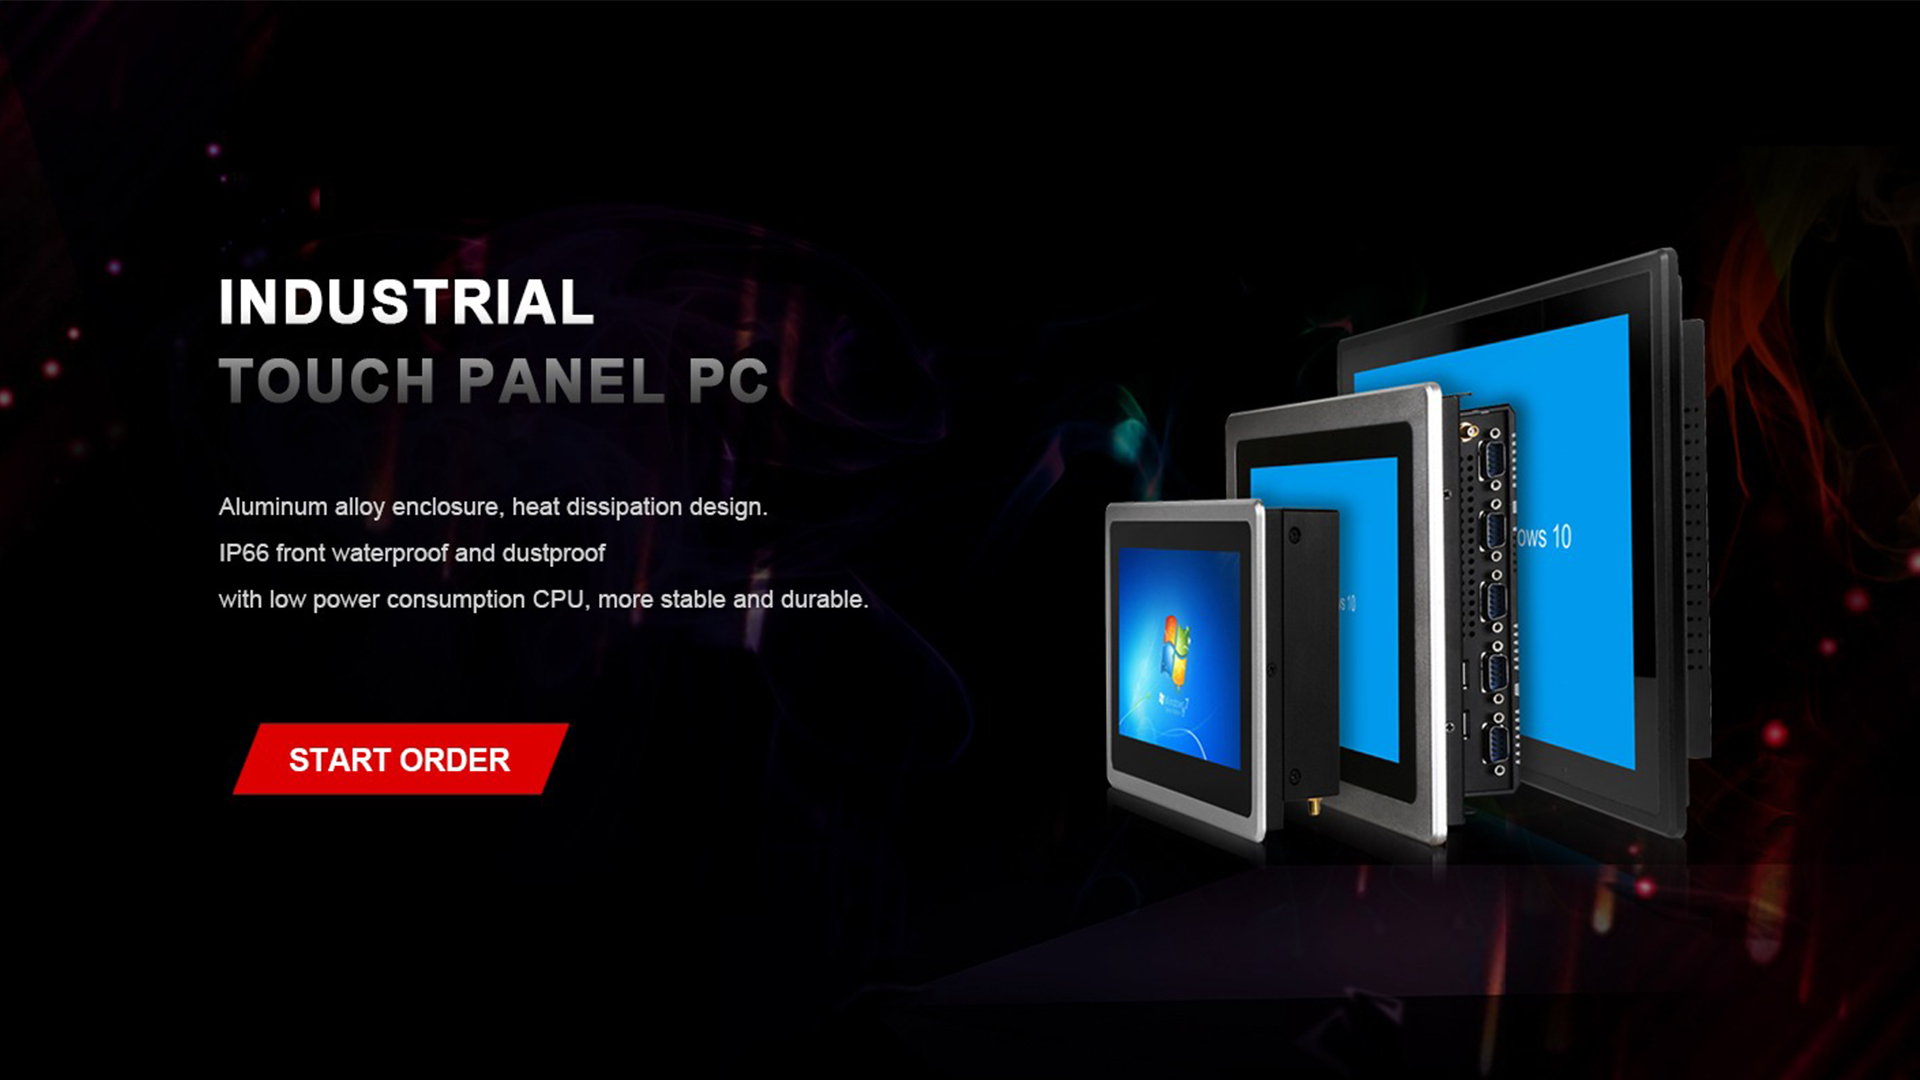 Industrial touch panel PC